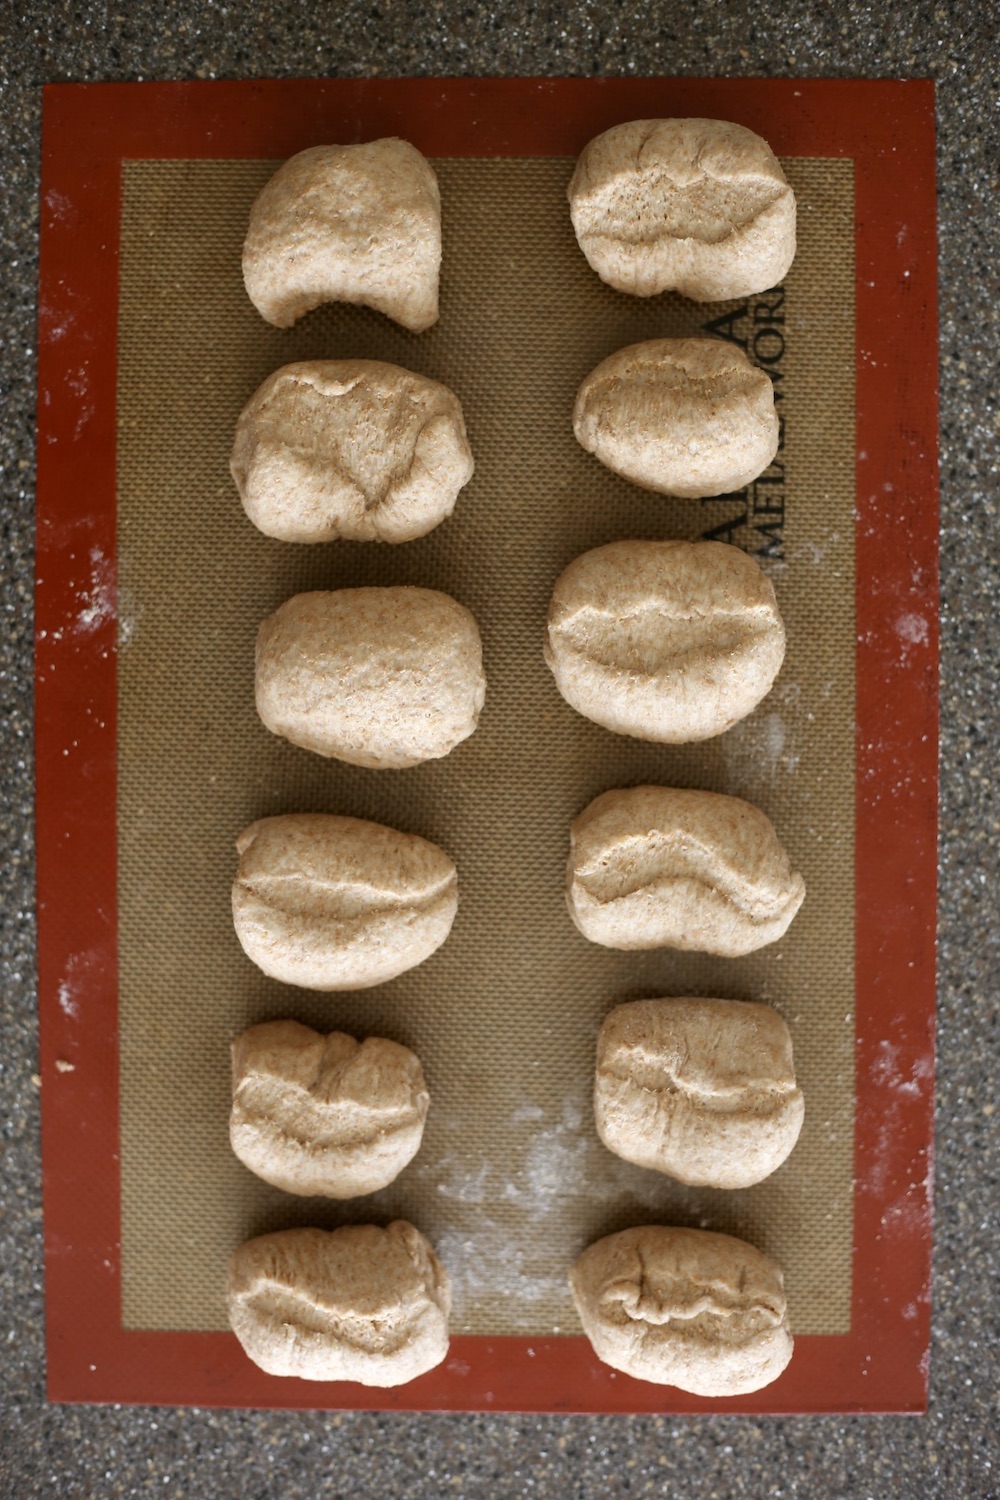 Twelve pieces of whole wheat bagel dough resting on a silicone baking mat.